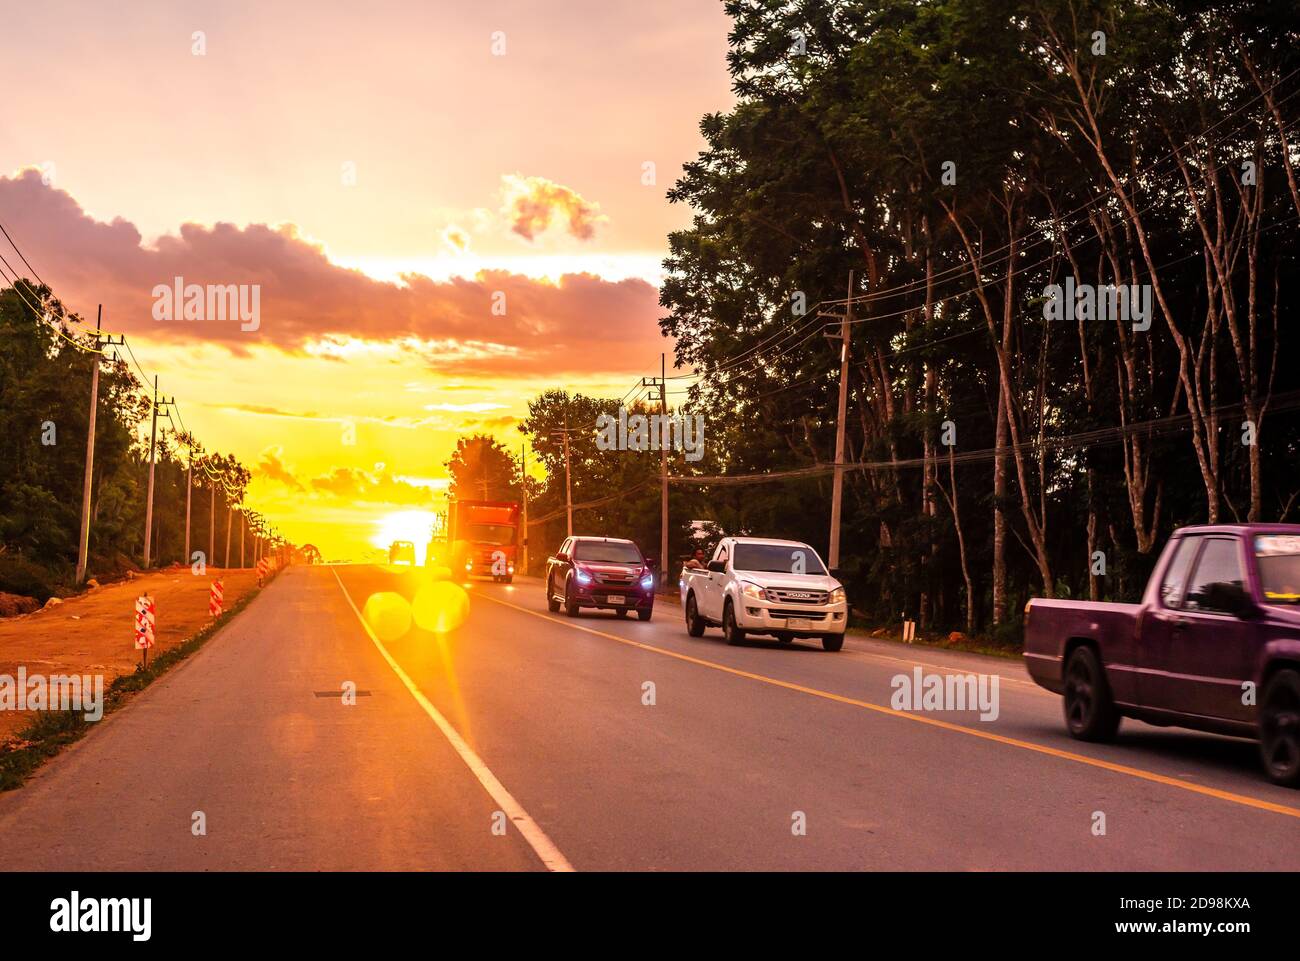 Pattalung, Thailand - August 29, 2020 : Car on road with colorful of sunset or sunrise in twilight Stock Photo